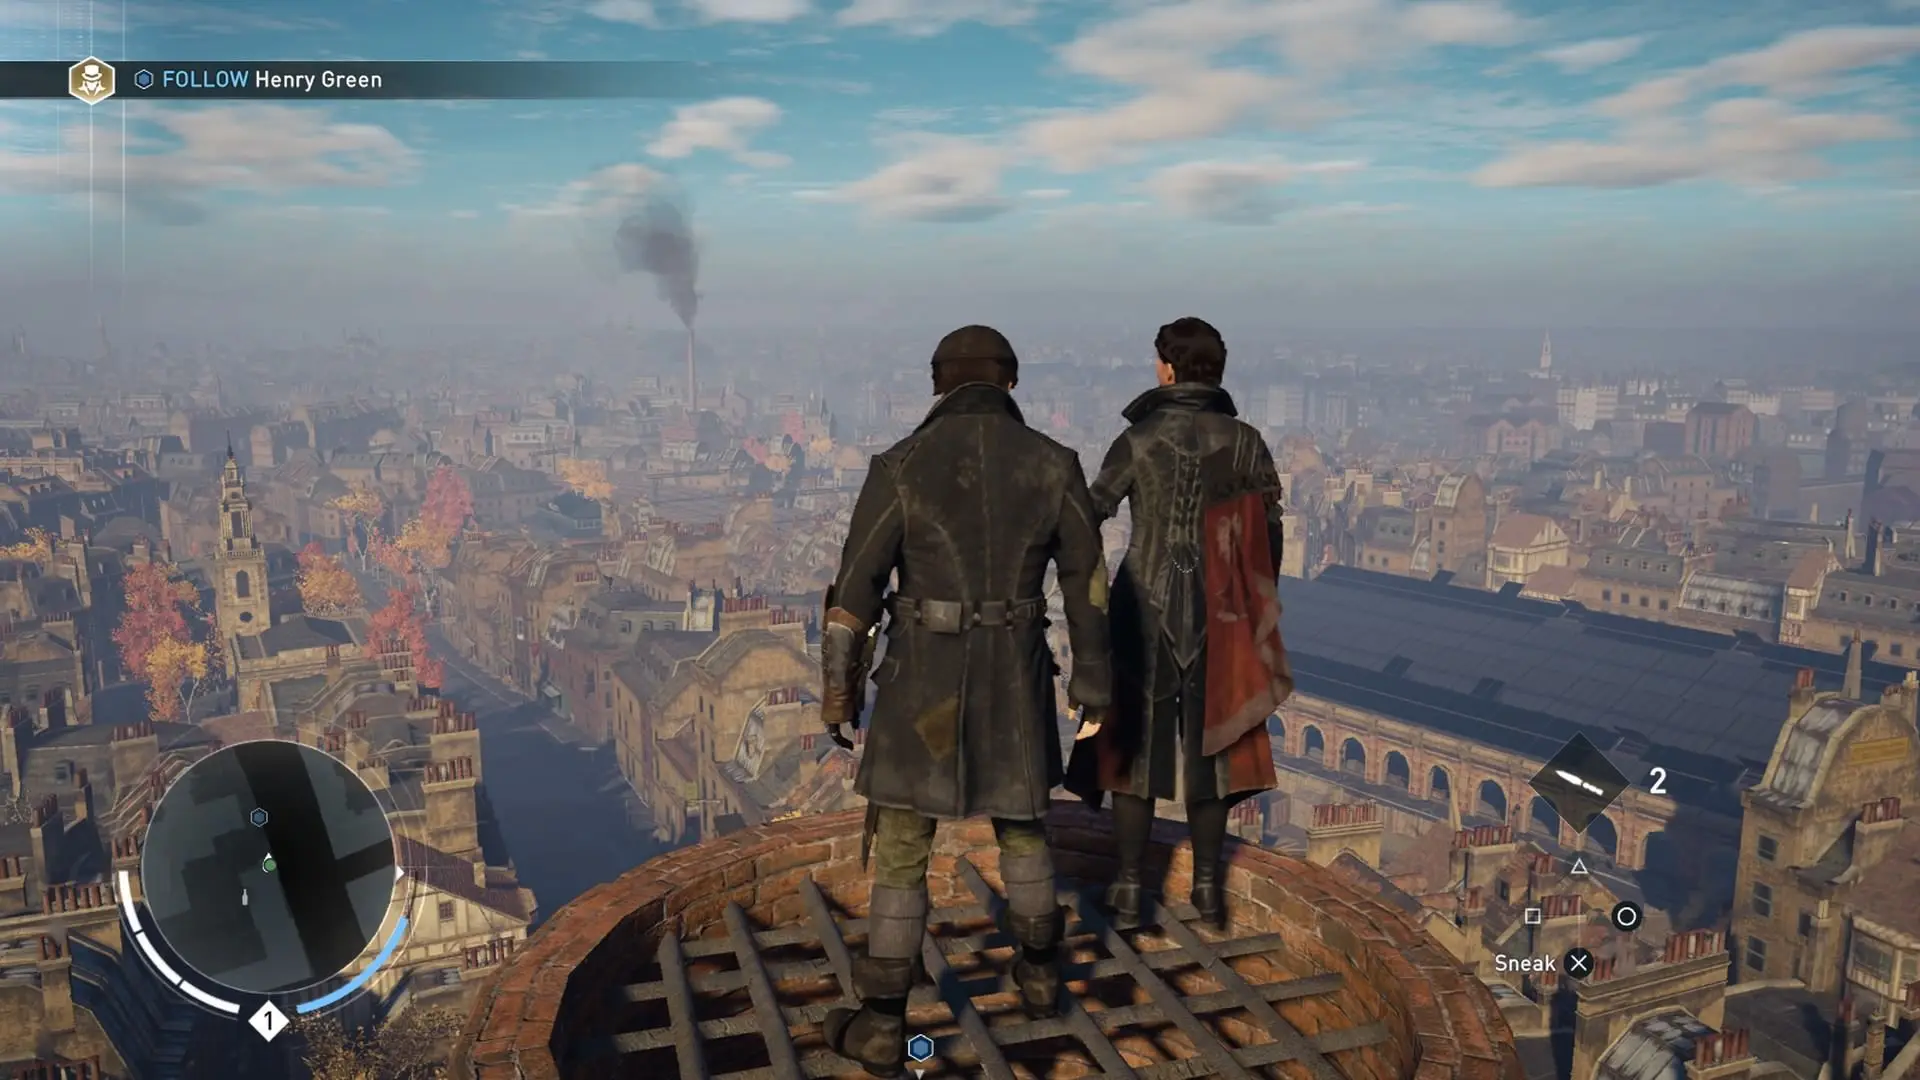 Assassin's Creed Syndicate. Assassin's Creed Синдикат ps4. Assassin’s Creed: Syndicate – 2015. Assassin's Creed Syndicate screenshots. Игра assassins creed ps4